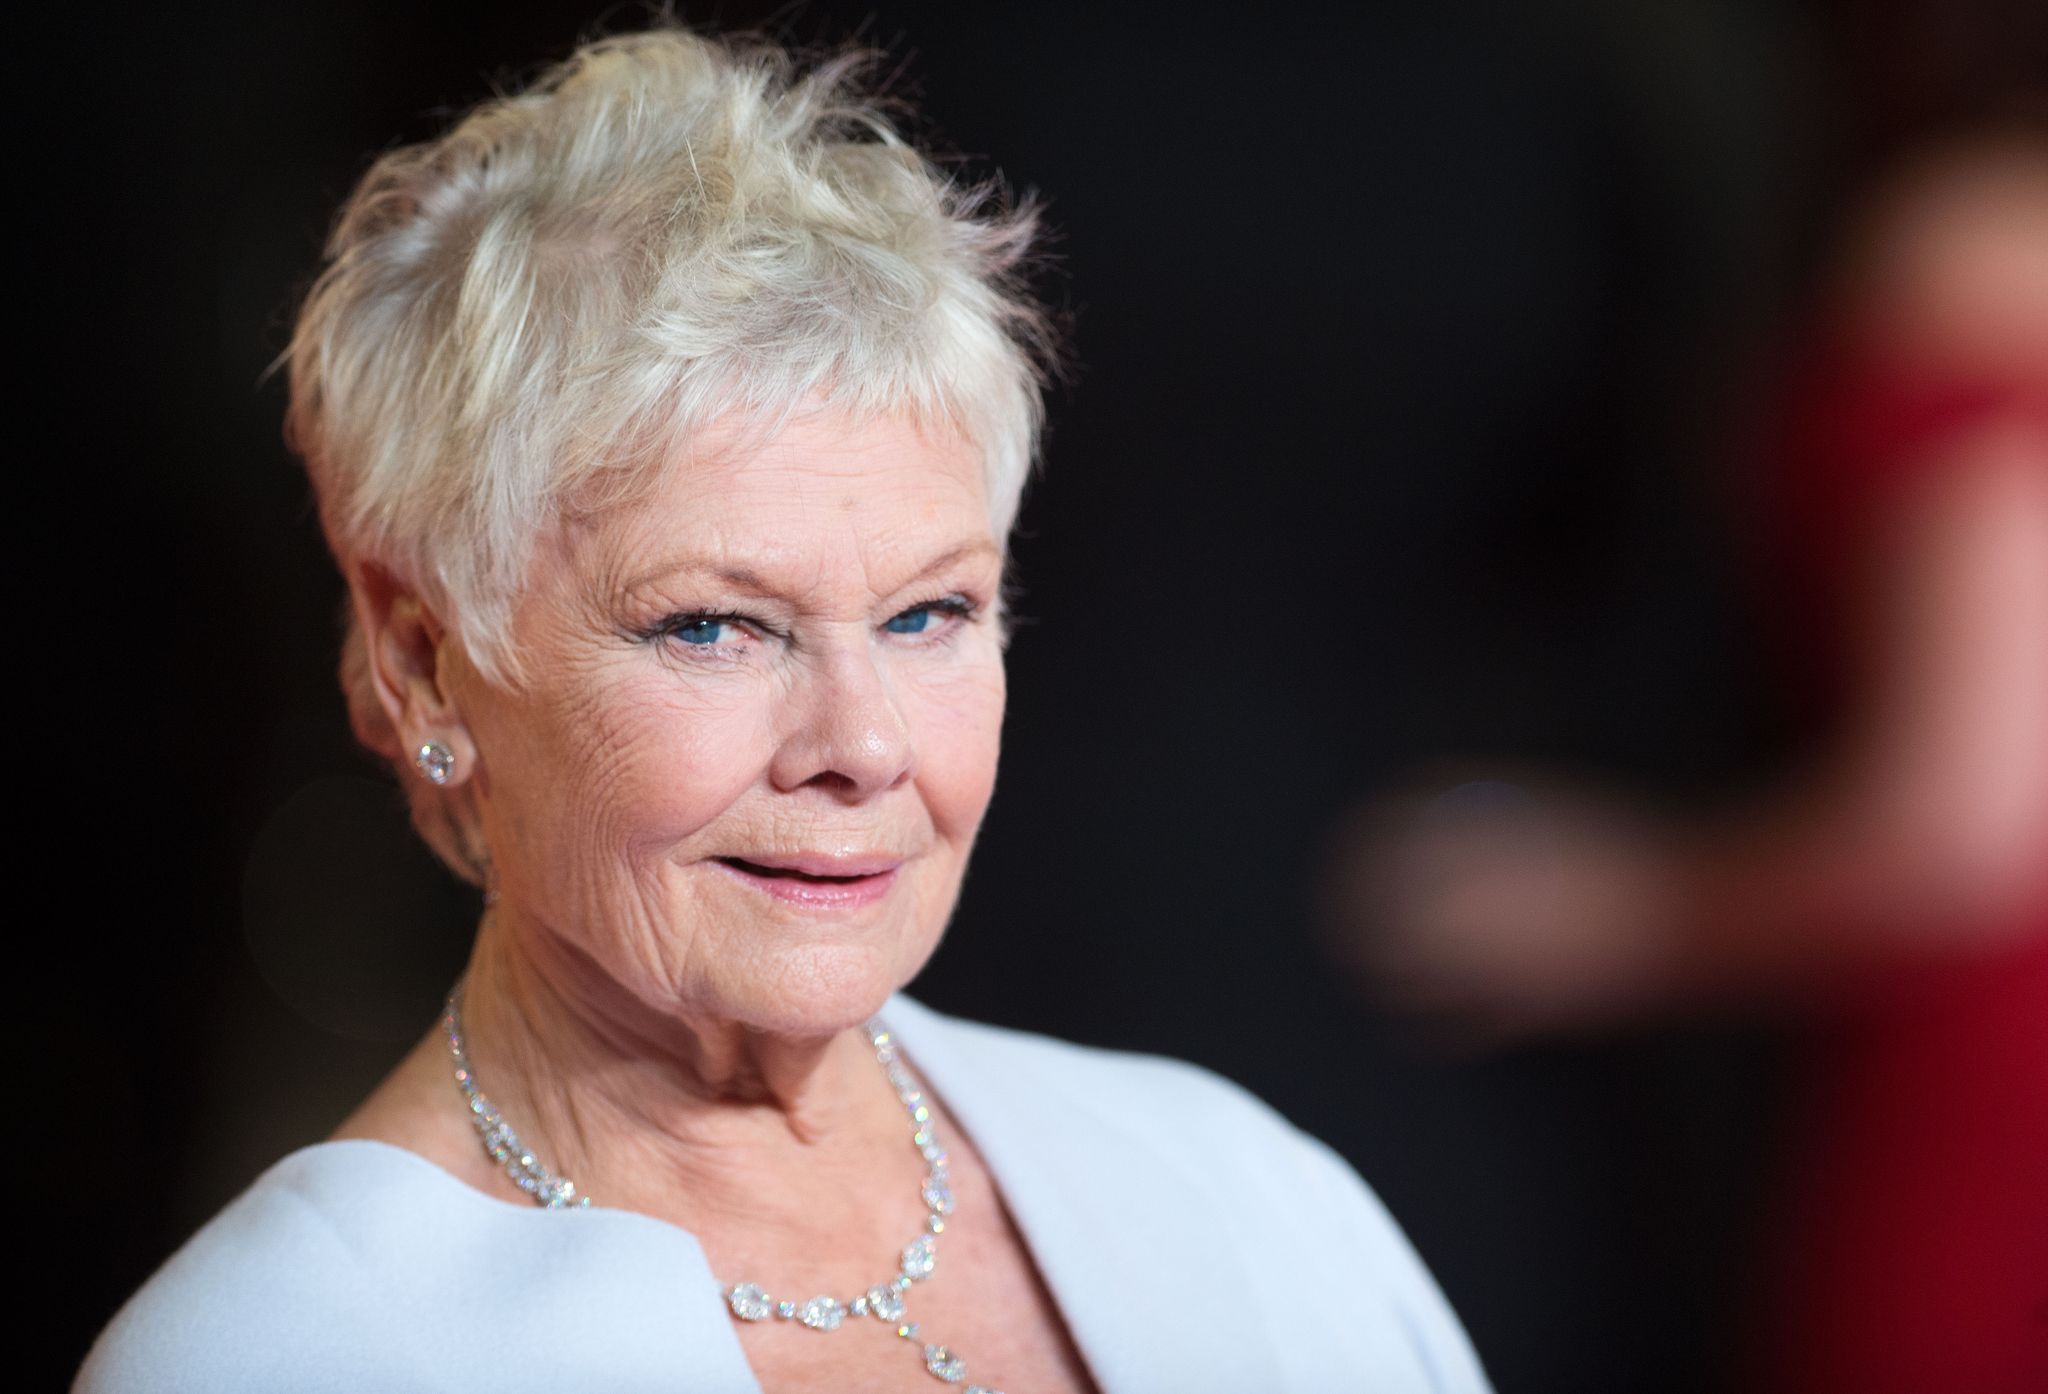  Dame Judi Dench at the Royal World Premiere of "Skyfall" in 2012  Dame Judi Dench at the Royal World Premiere of "Skyfall" in 2012 in London, England | Photo: Getty Images